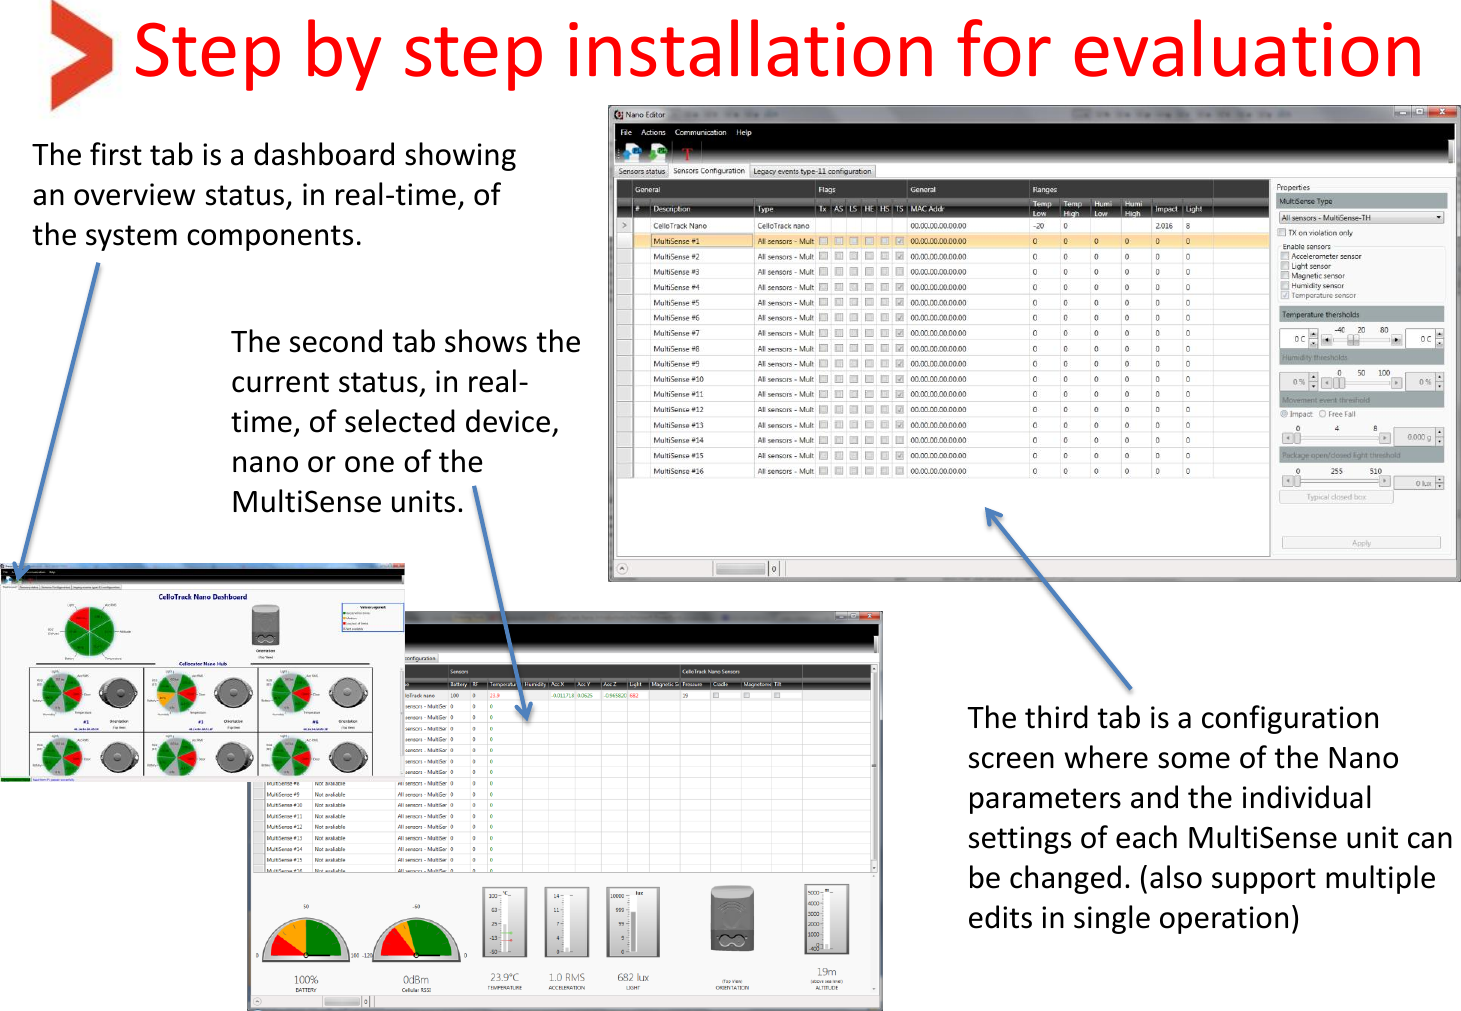 Step by step installation for evaluation The first tab is a dashboard showing an overview status, in real-time, of the system components. The third tab is a configuration screen where some of the Nano parameters and the individual settings of each MultiSense unit can be changed. (also support multiple edits in single operation) The second tab shows the current status, in real-time, of selected device, nano or one of the MultiSense units.  